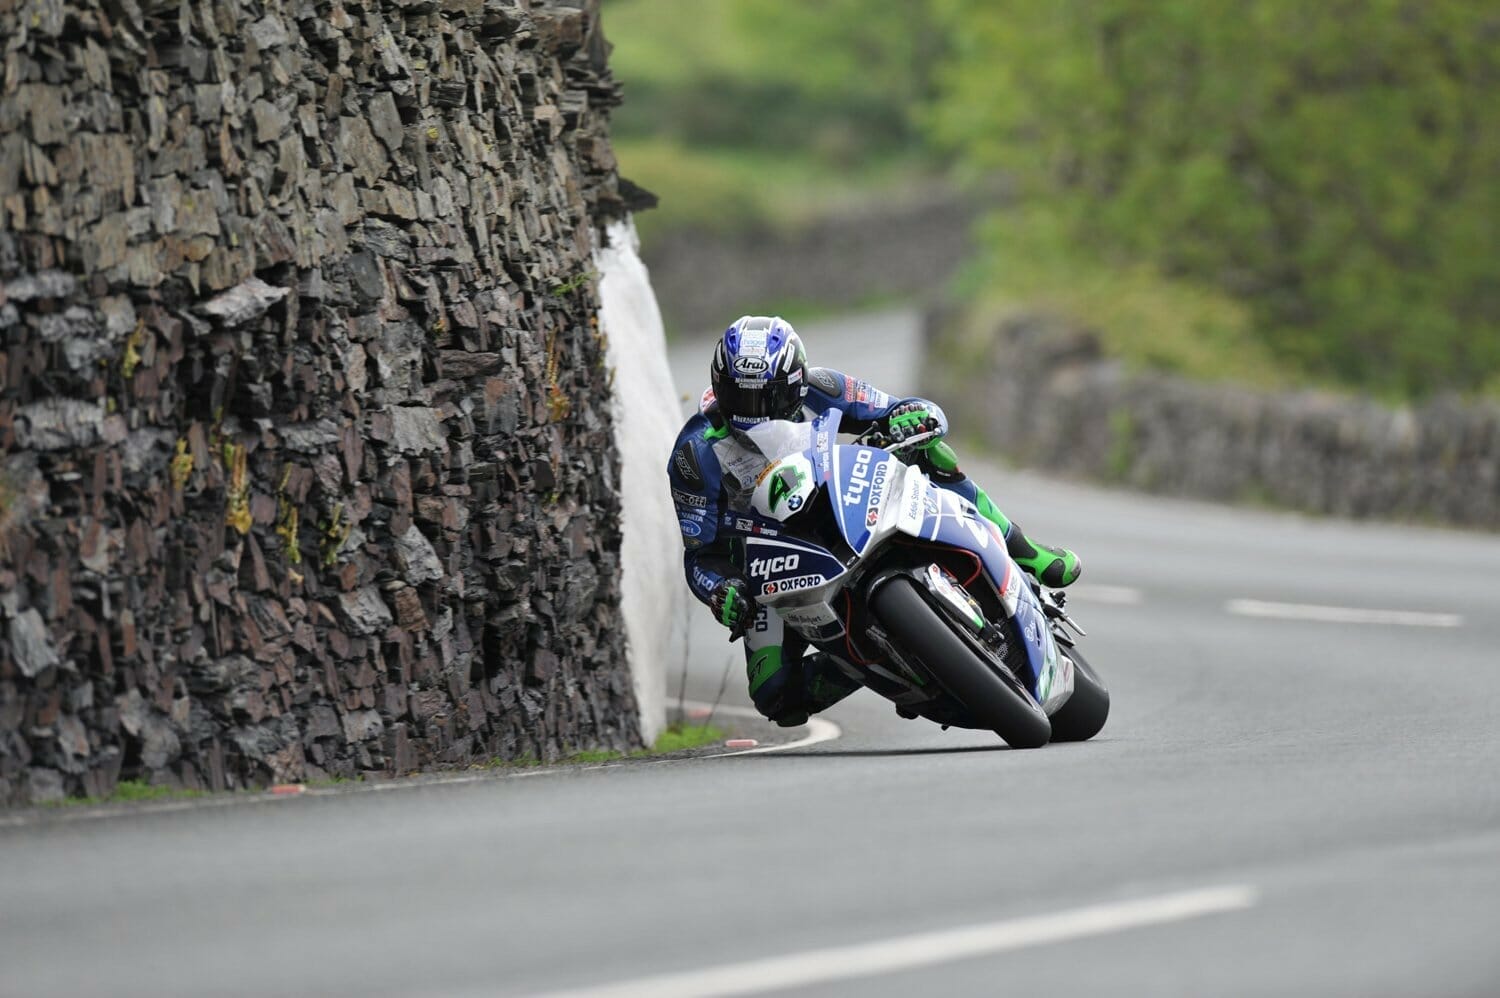 Isle of Man TT 2017 – the second qualifying session